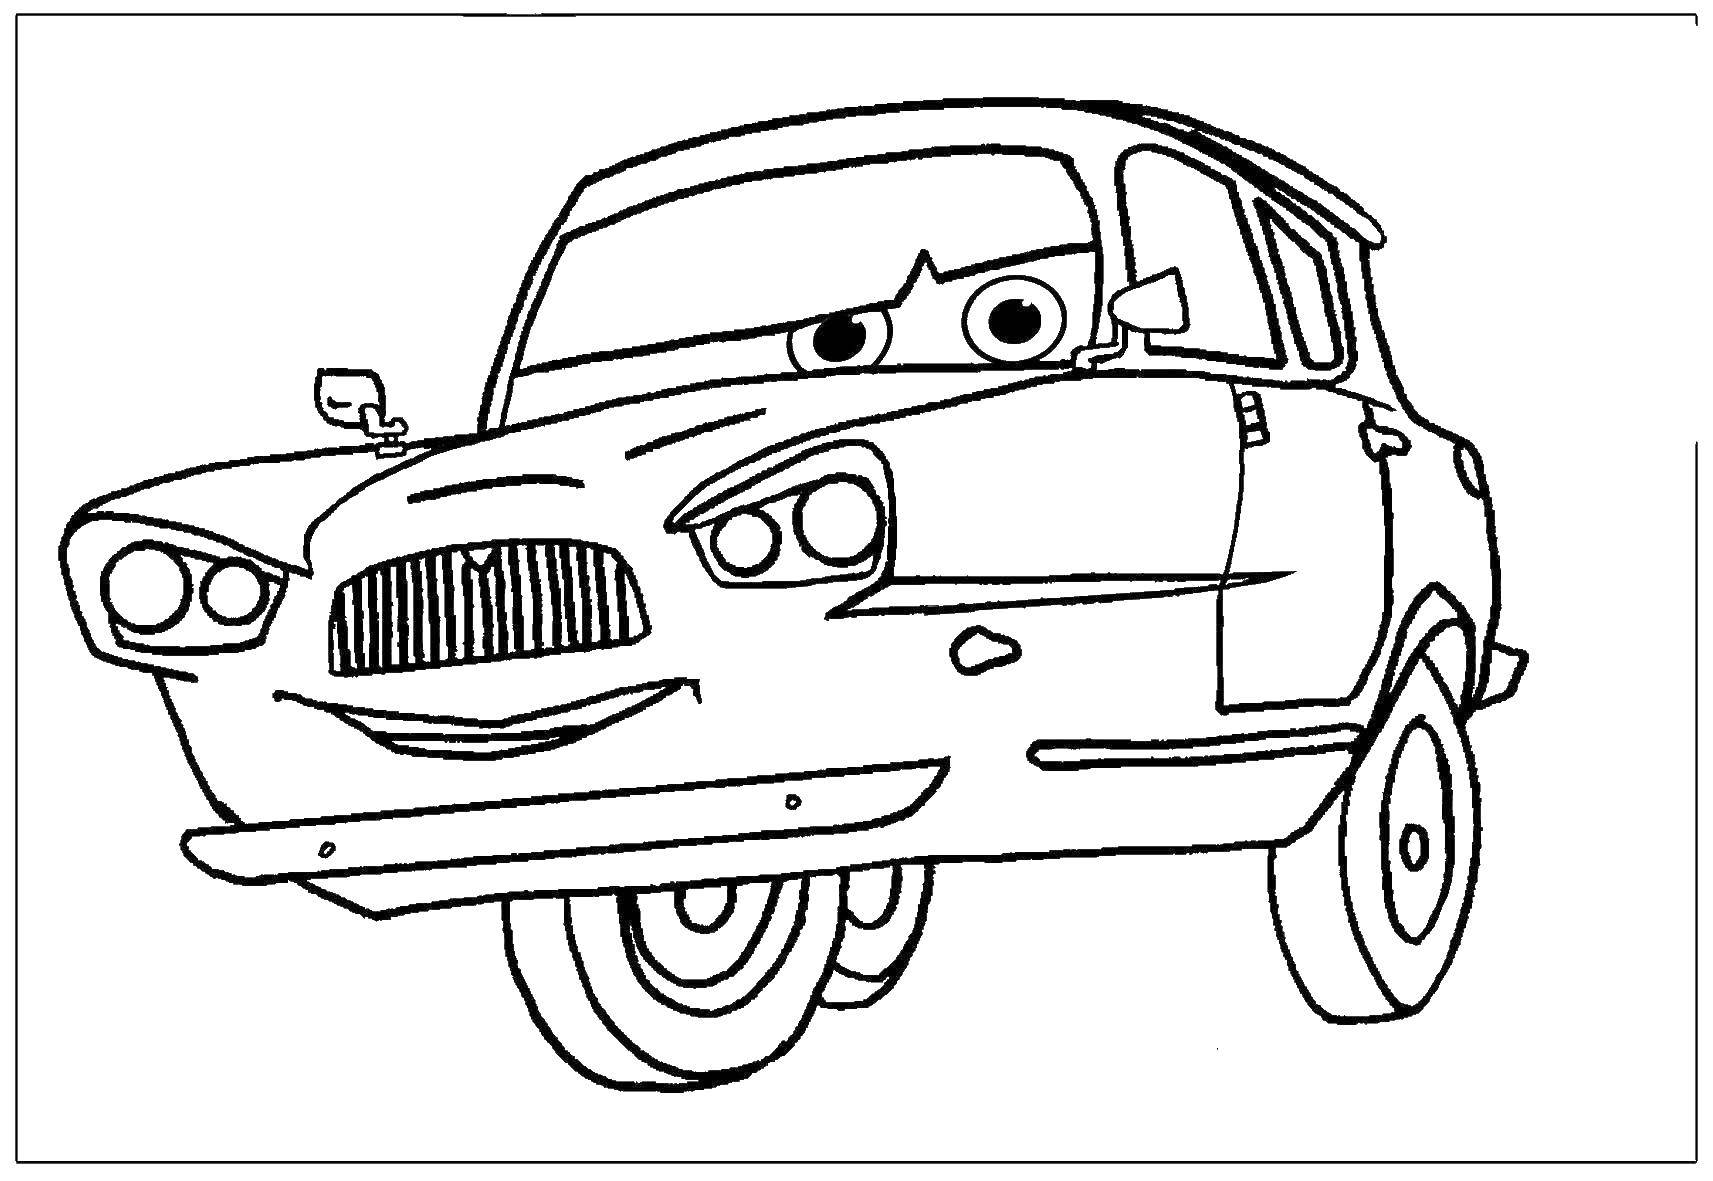 Coloring Cars. Category Machine . Tags:  cartoons Cars, cars.